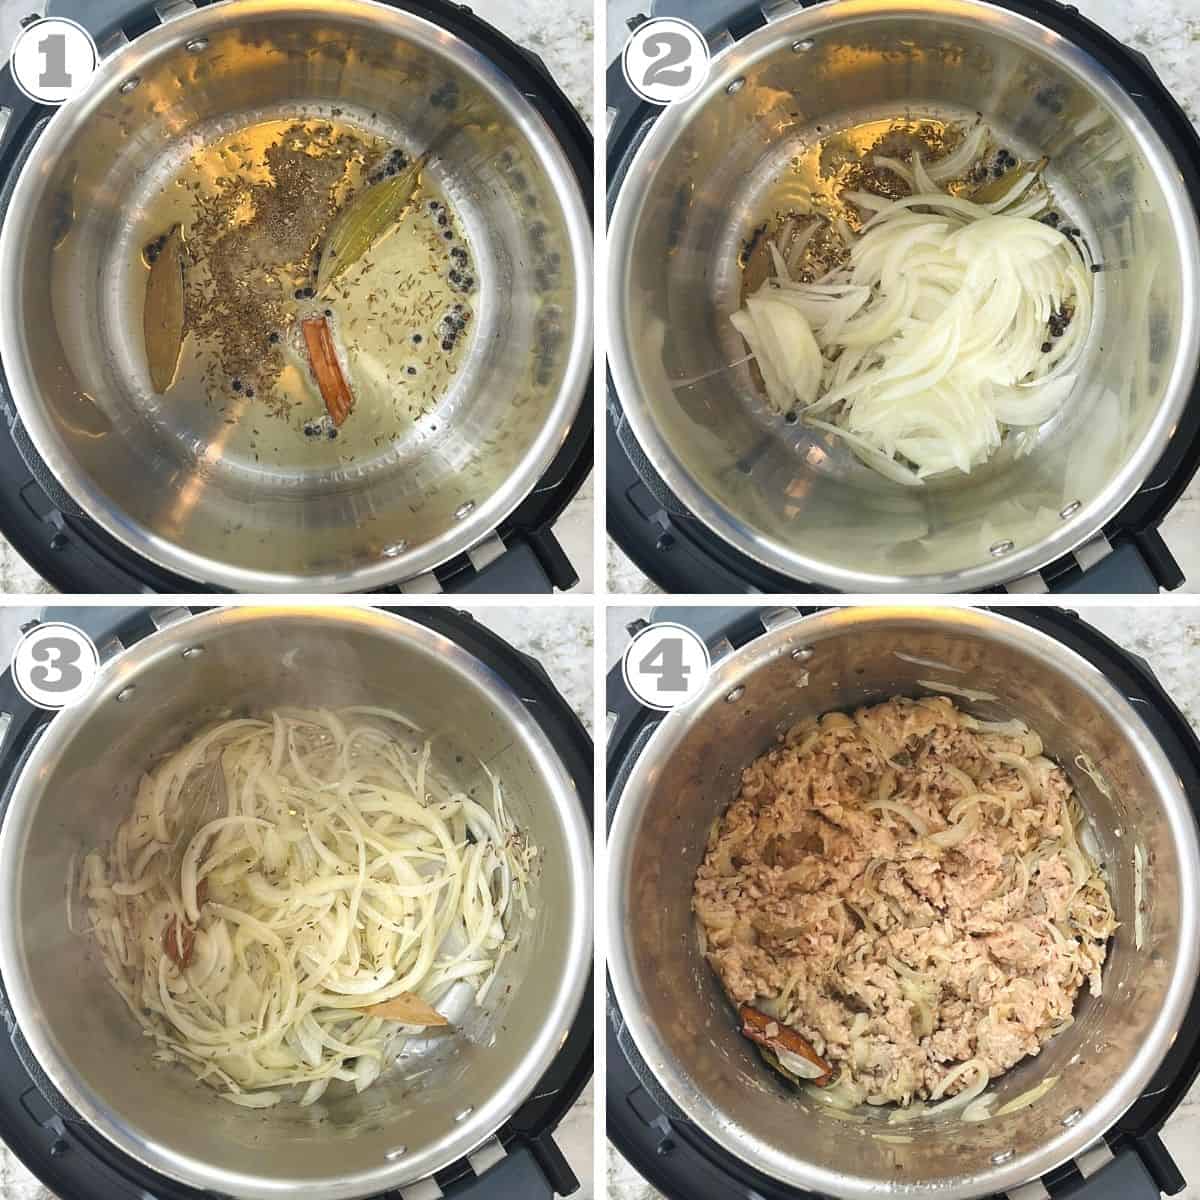 photos one through four showing sauteeing spices, onions and minced chicken 